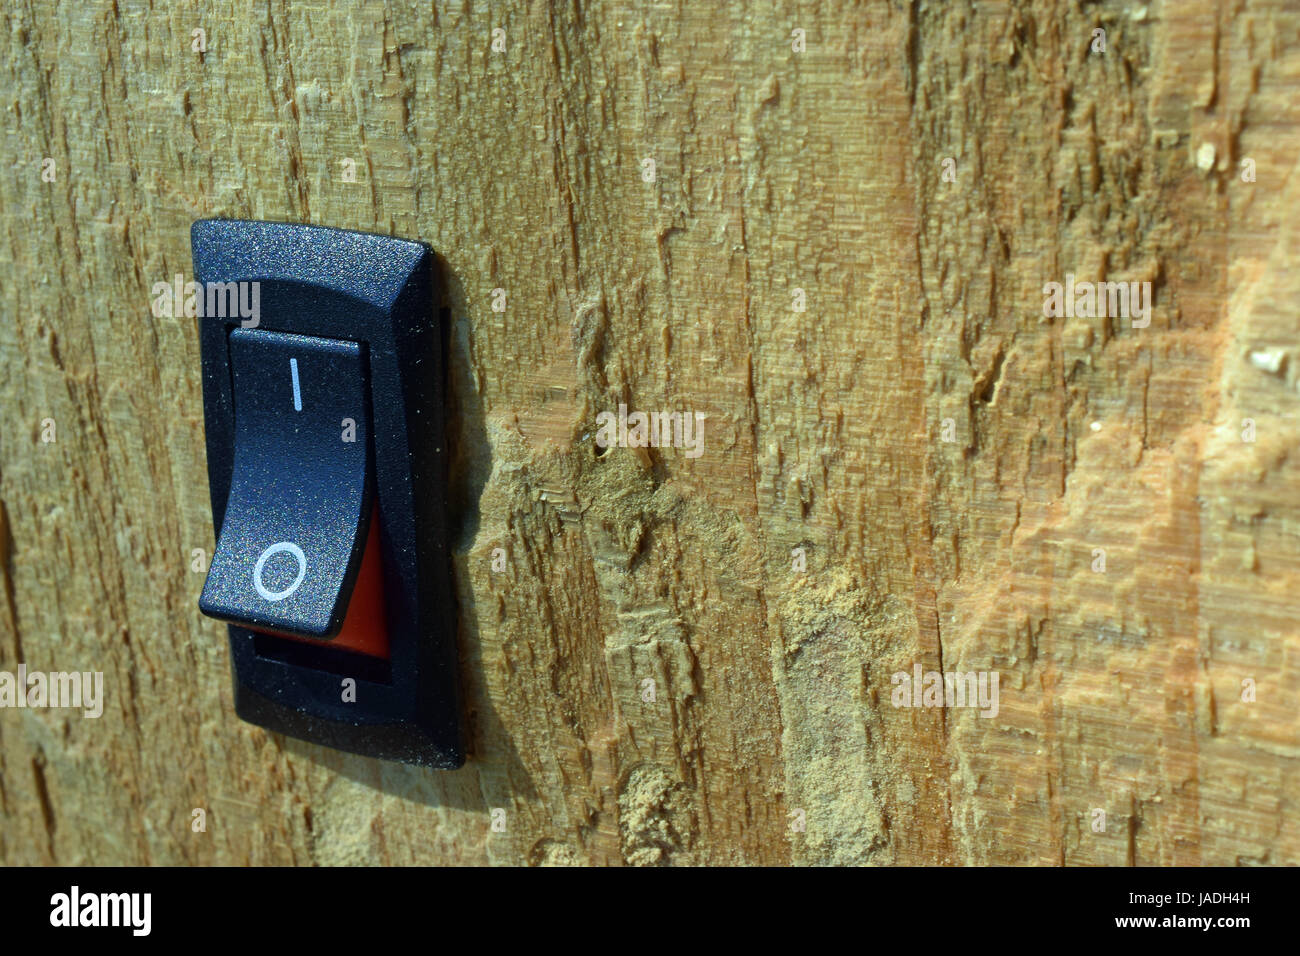 Power switch inserted on wood. Conservation, green business and alternative energy concept. Stock Photo